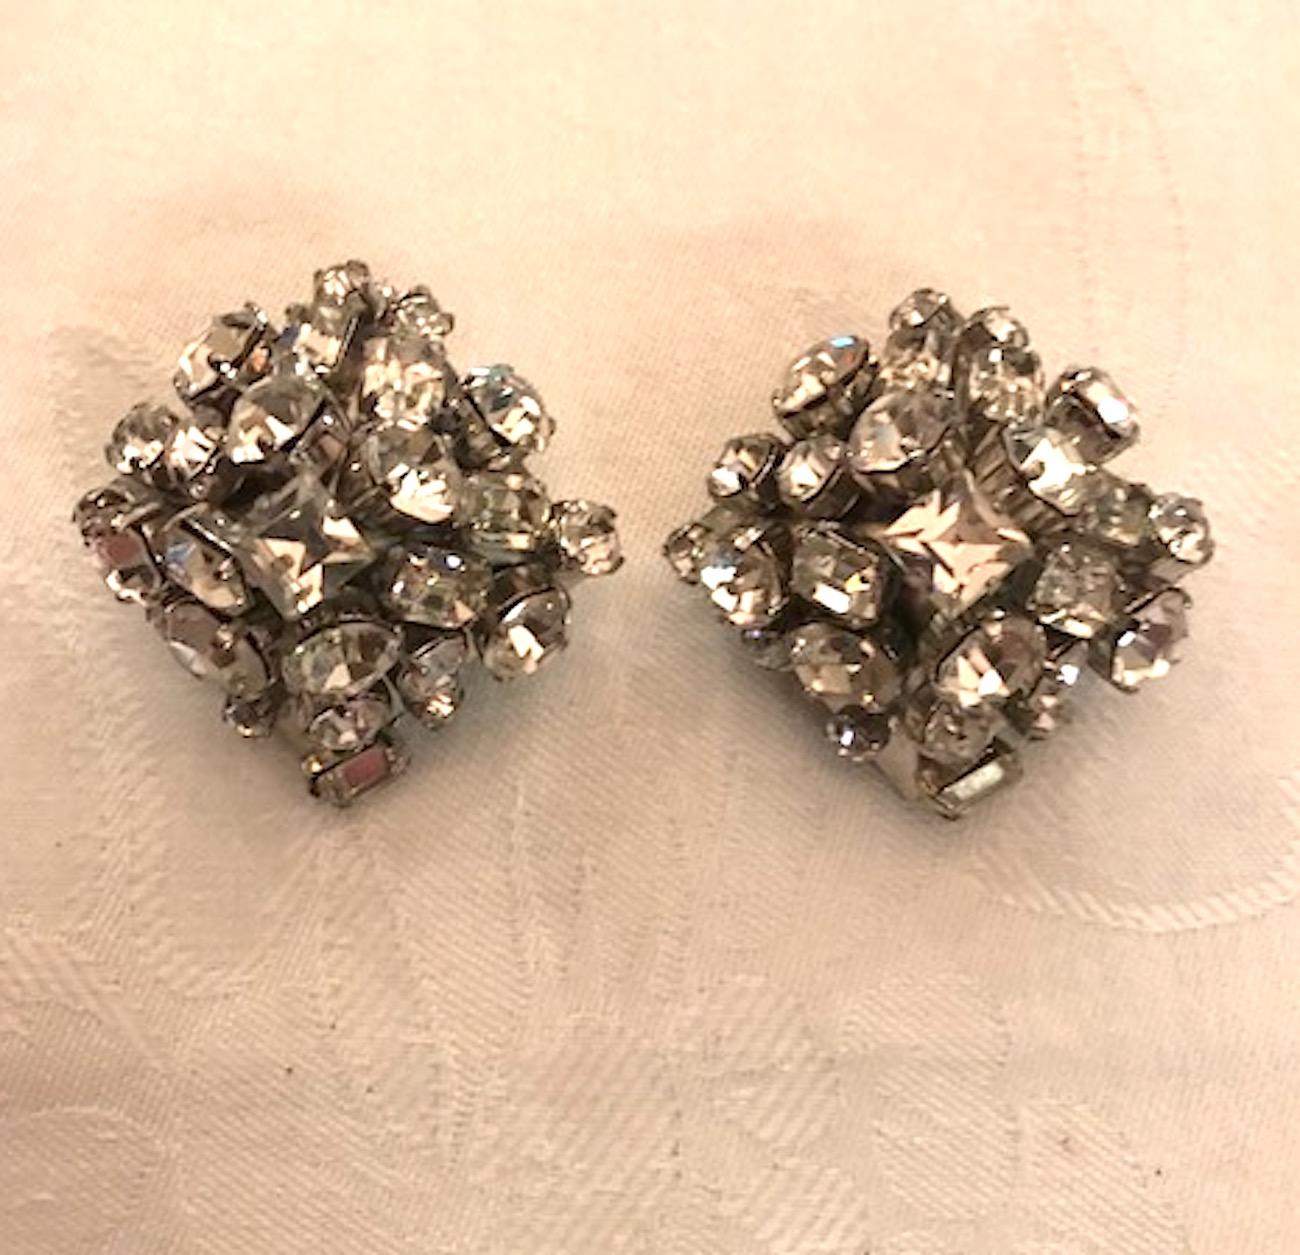 A very chic and fashion forward pair of Elsa Martinelli's De Liguoro pyramid rhinestone earrings. Rhodium plated metal pyramid are mounted with square, rouge and emerald cut rhinestones. Unsigned, however construction and use of round chrome lace